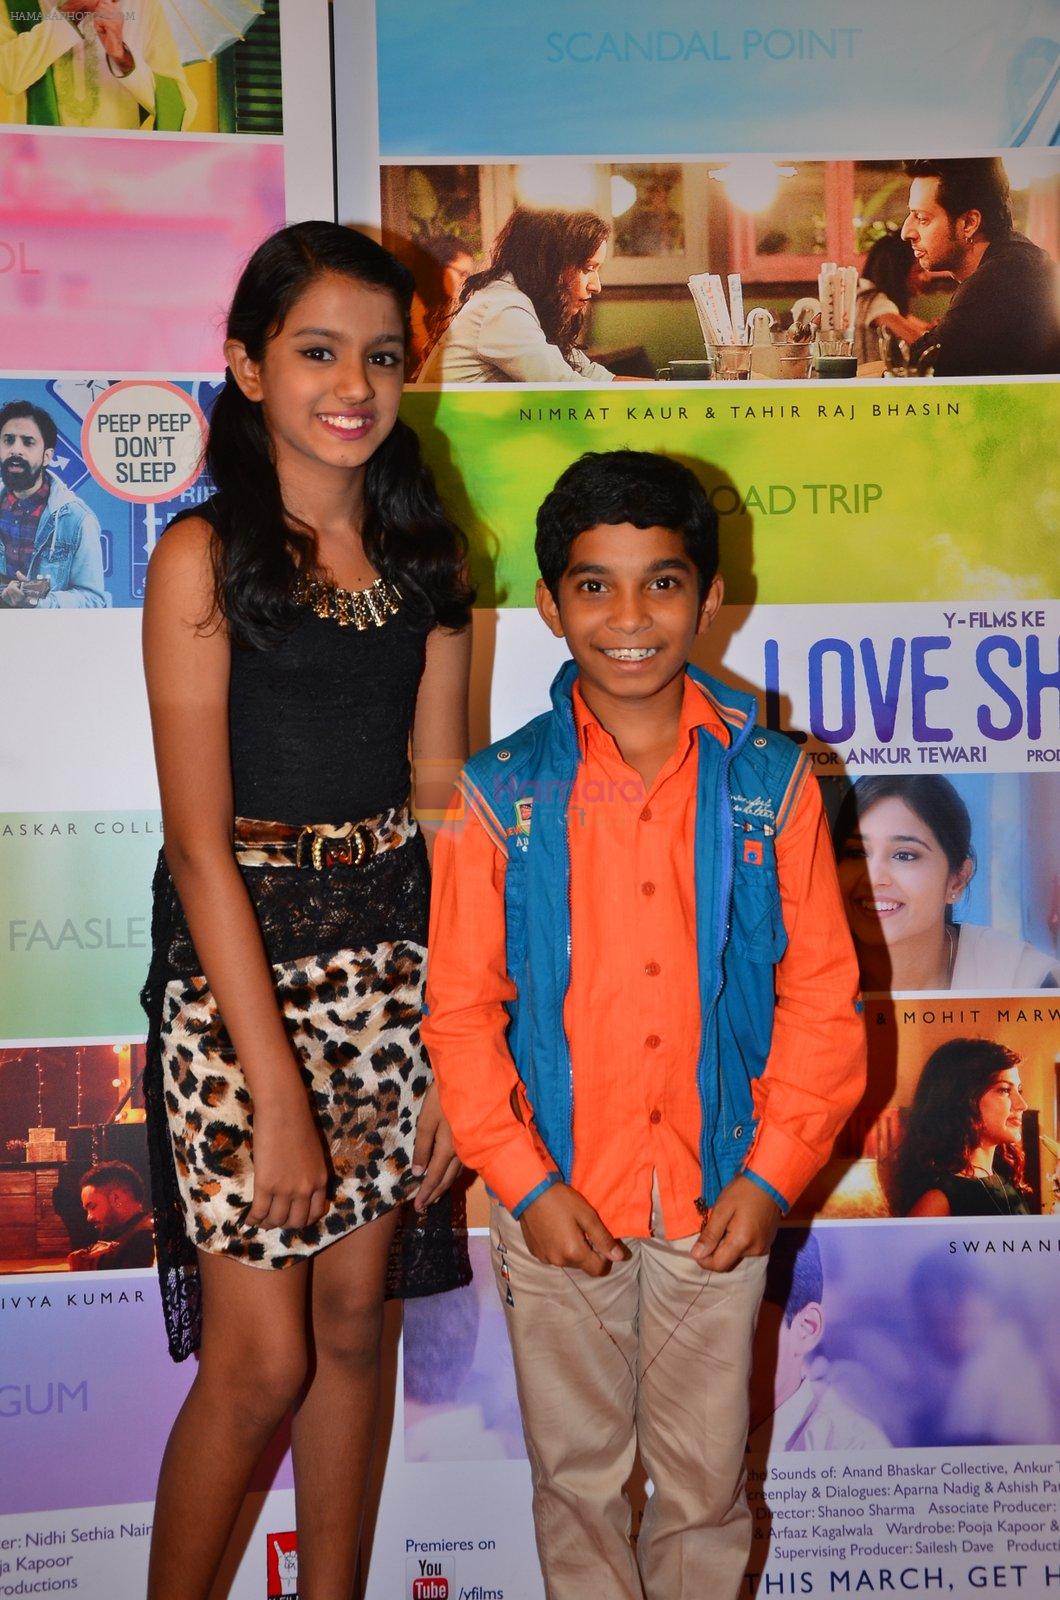 at the launch of Love Shots film launch on 7th March 2016